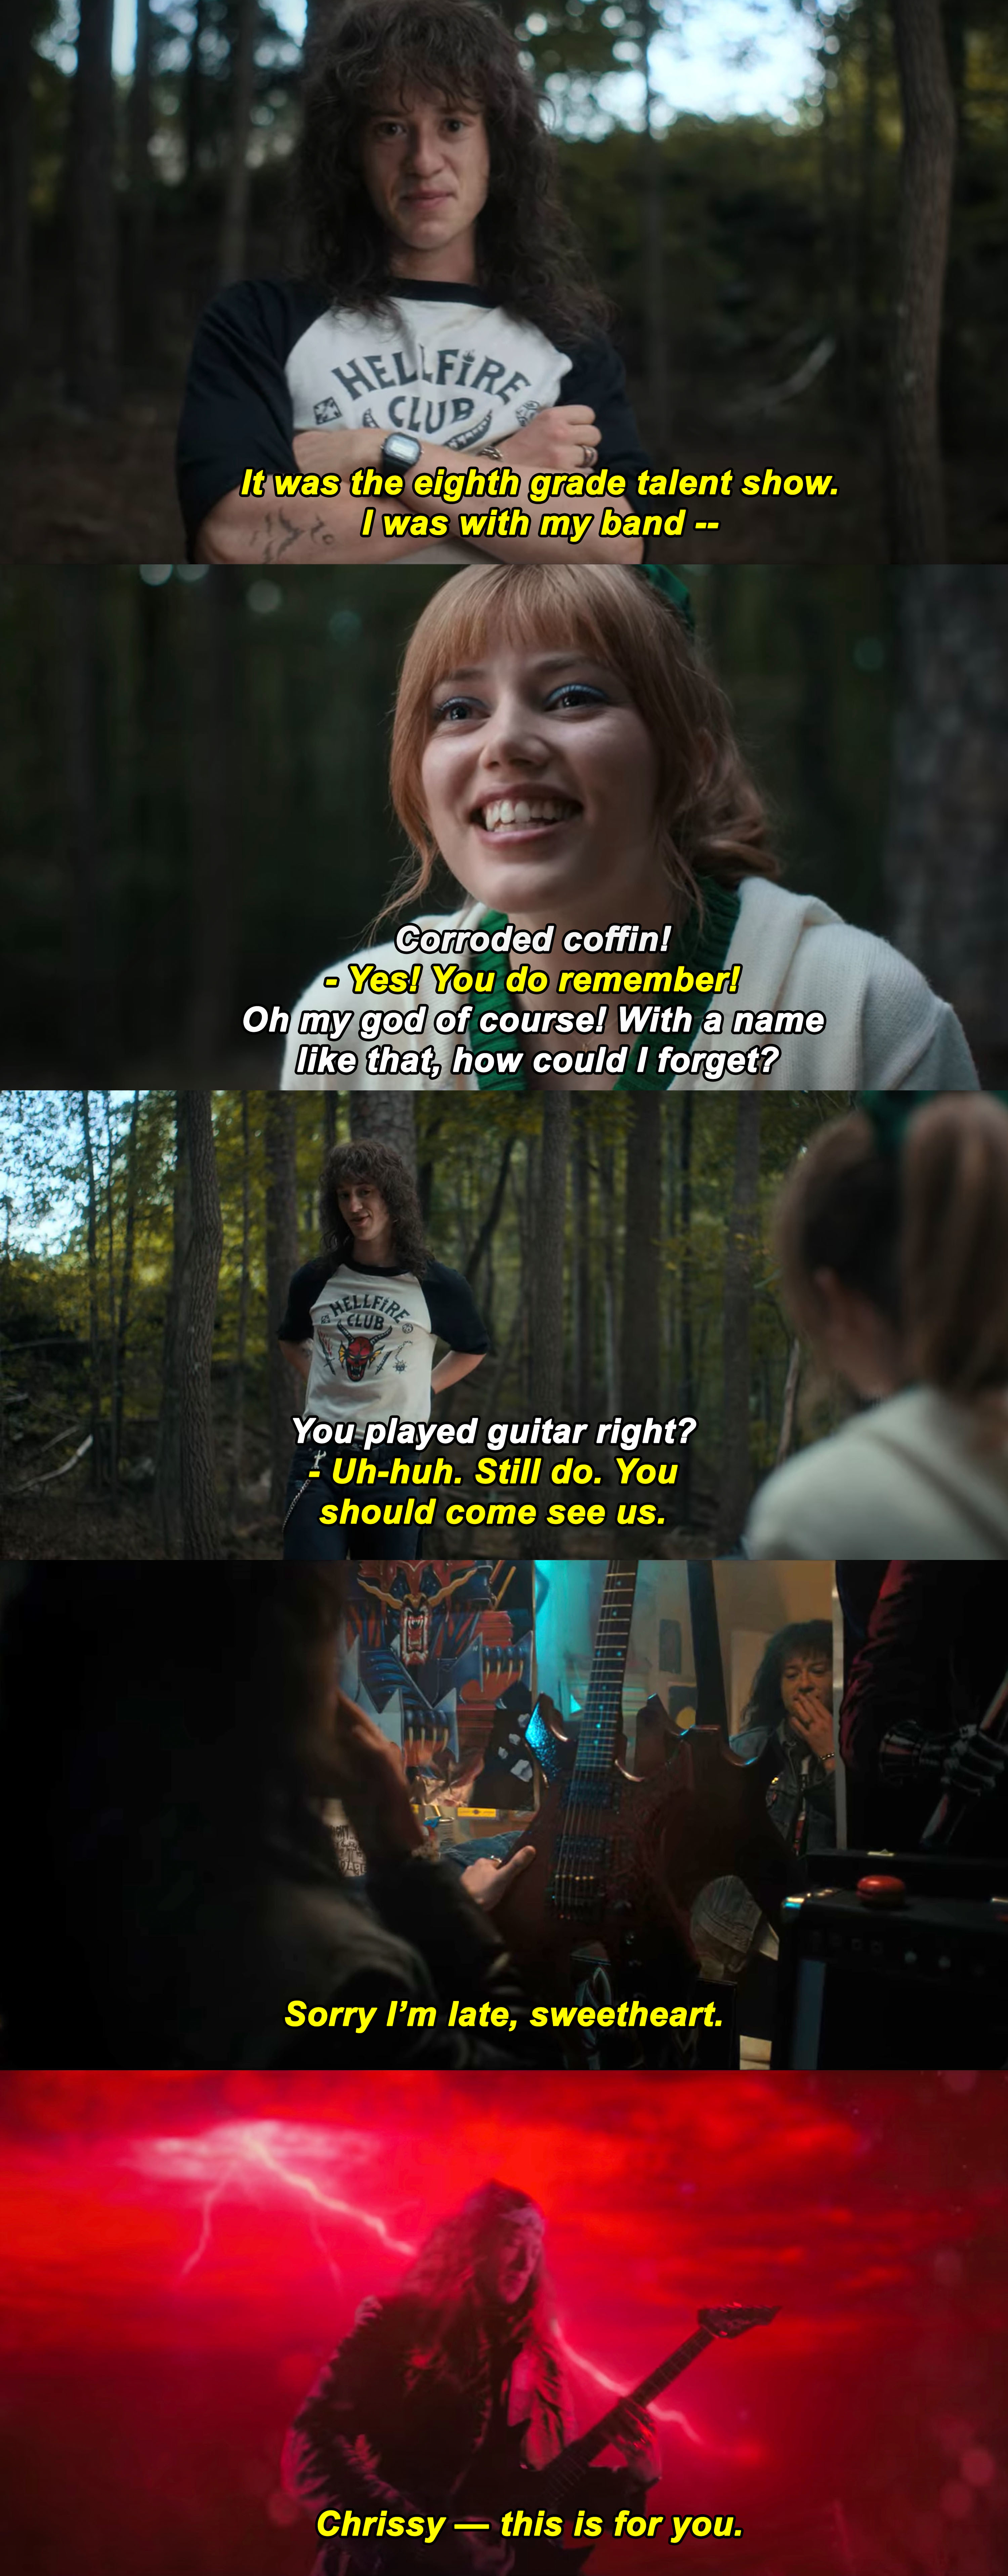 Eddie and Chrissy talking in the woods and Eddie playing guitar